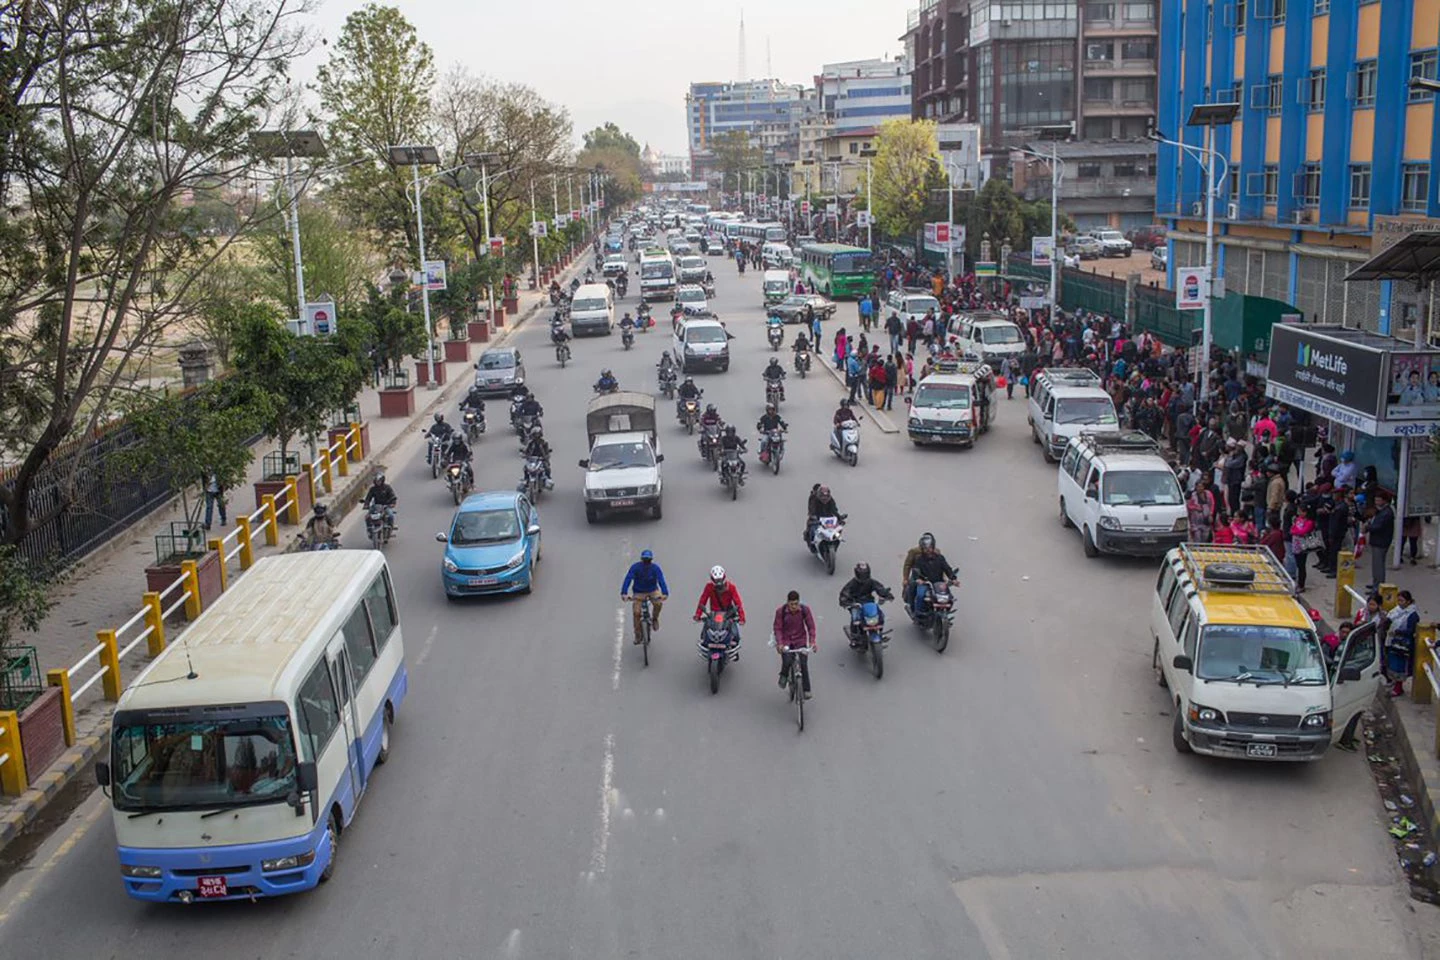 Road crash deaths and injuries in Nepal have been on a sharp upward trajectory since the early 2000s, as the country invested in increasing road connectivity and economic growth boosted vehicle ownership. 